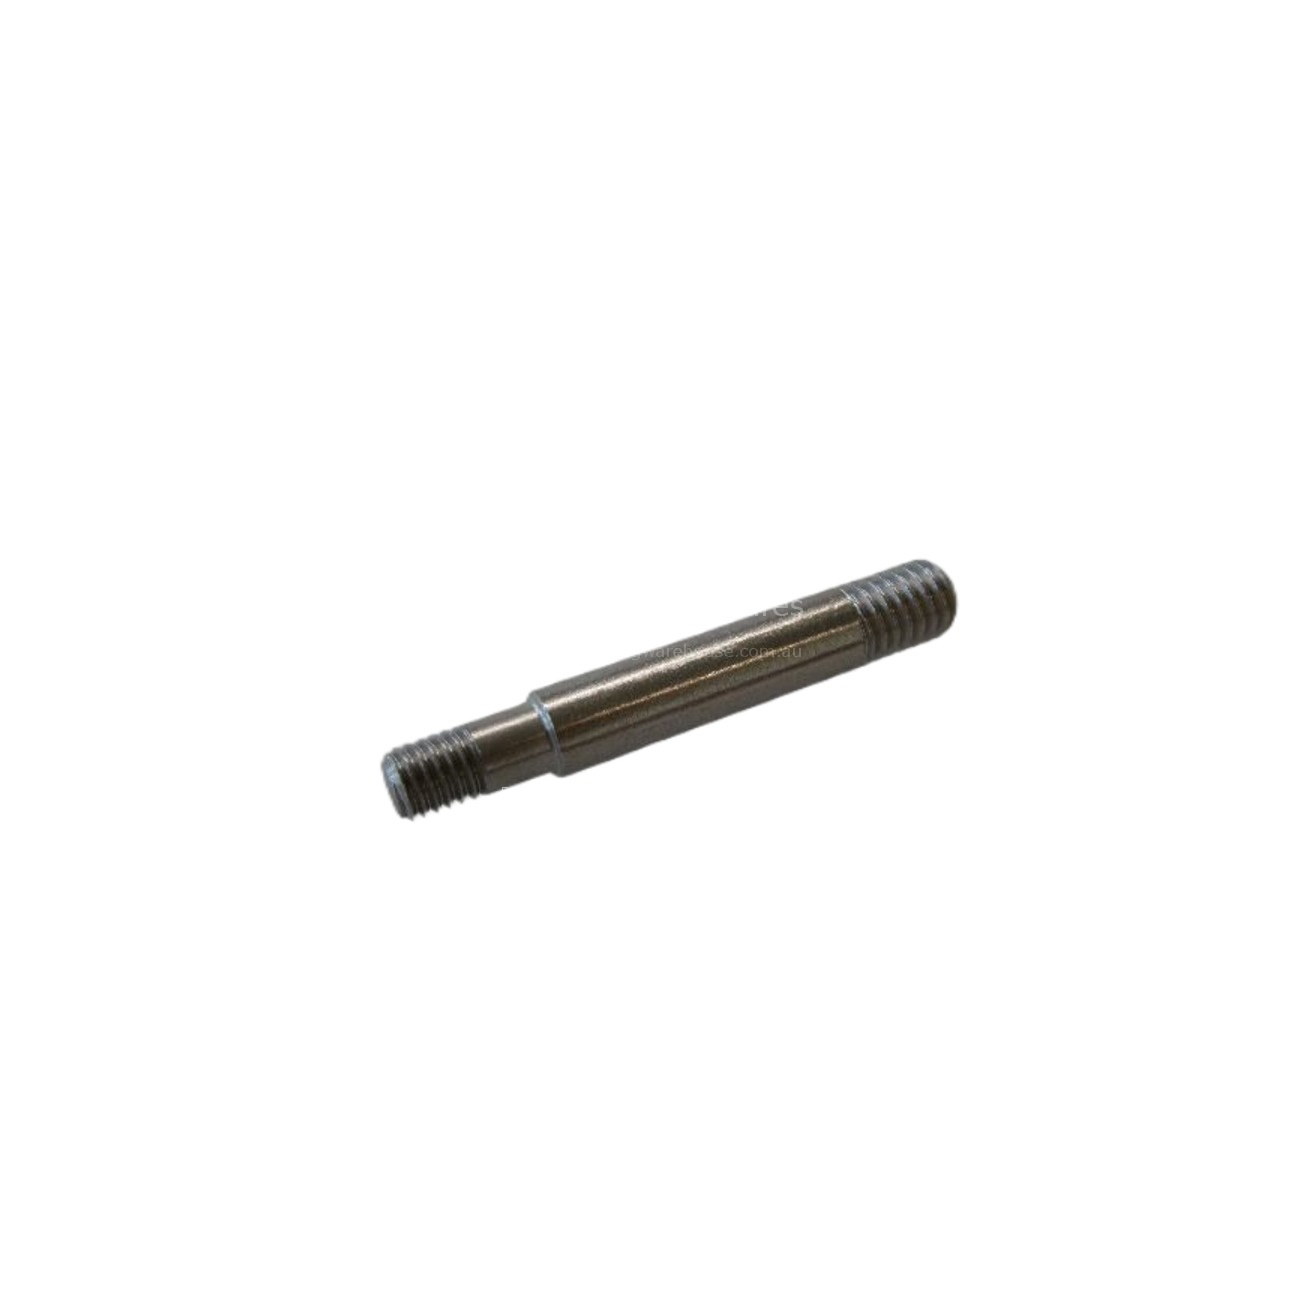 PIN STAINLESS STEEL M6xM5x40 mm